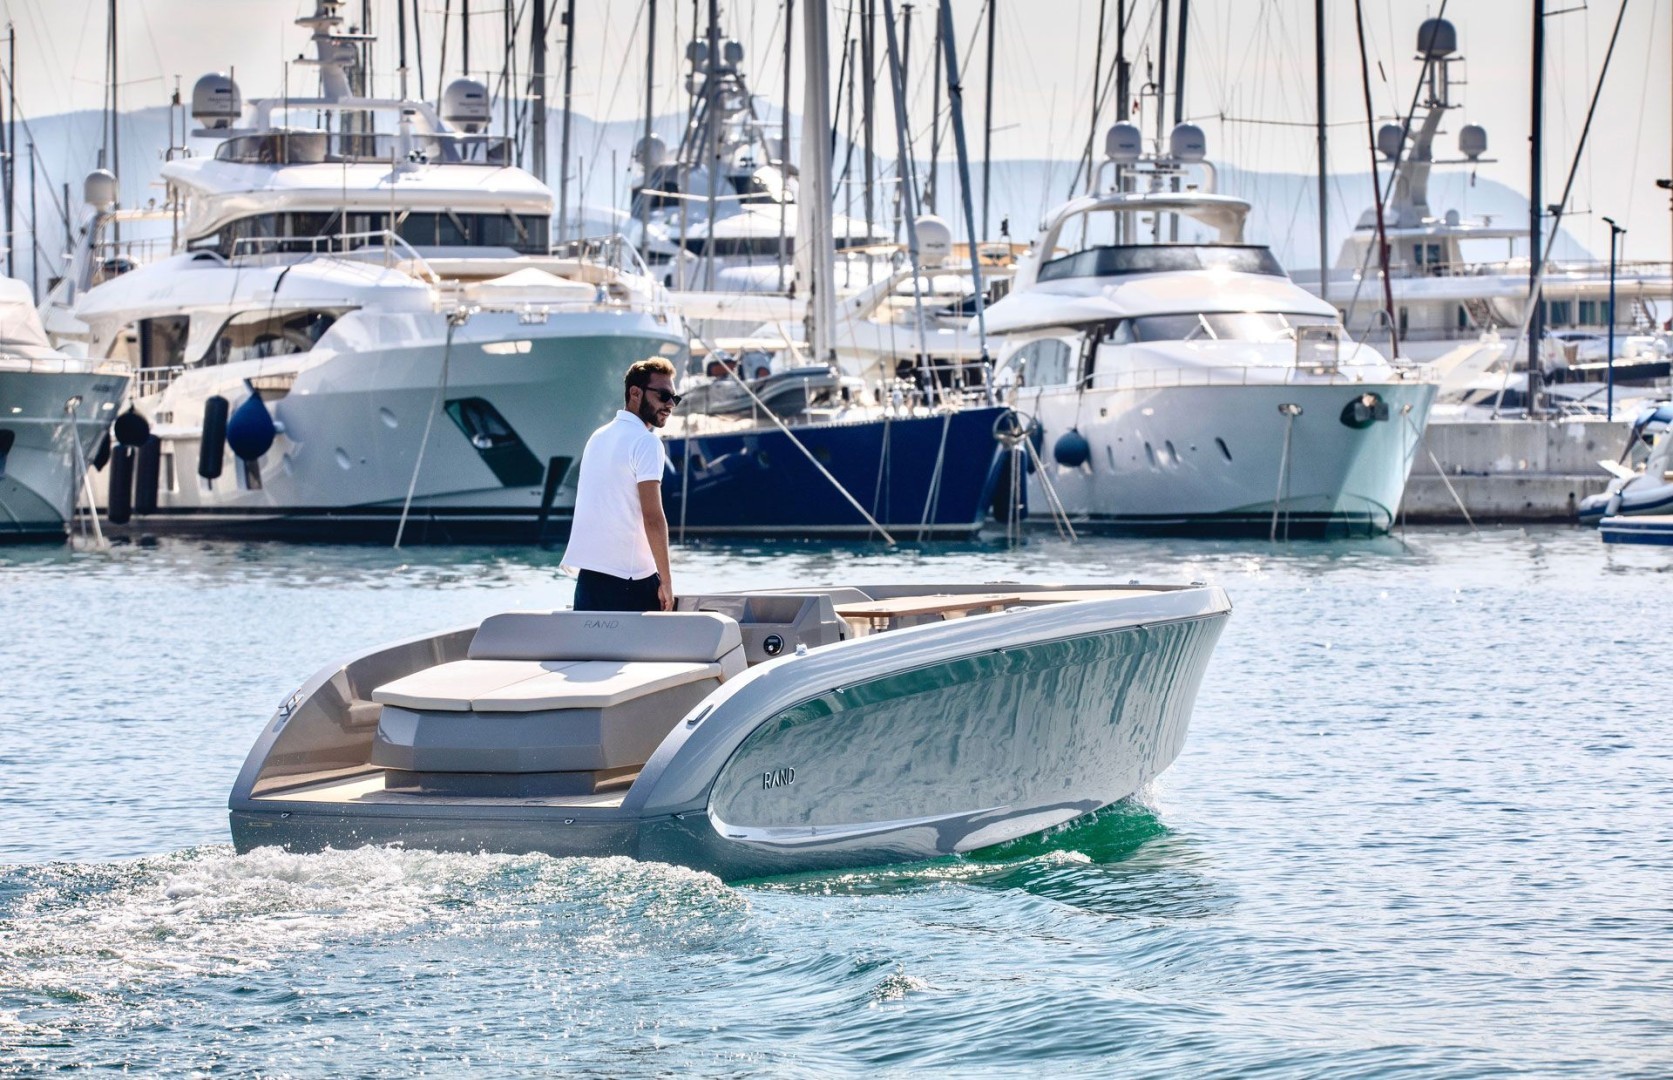 Torqeedo will be at the 2022 Miami International Boat Show